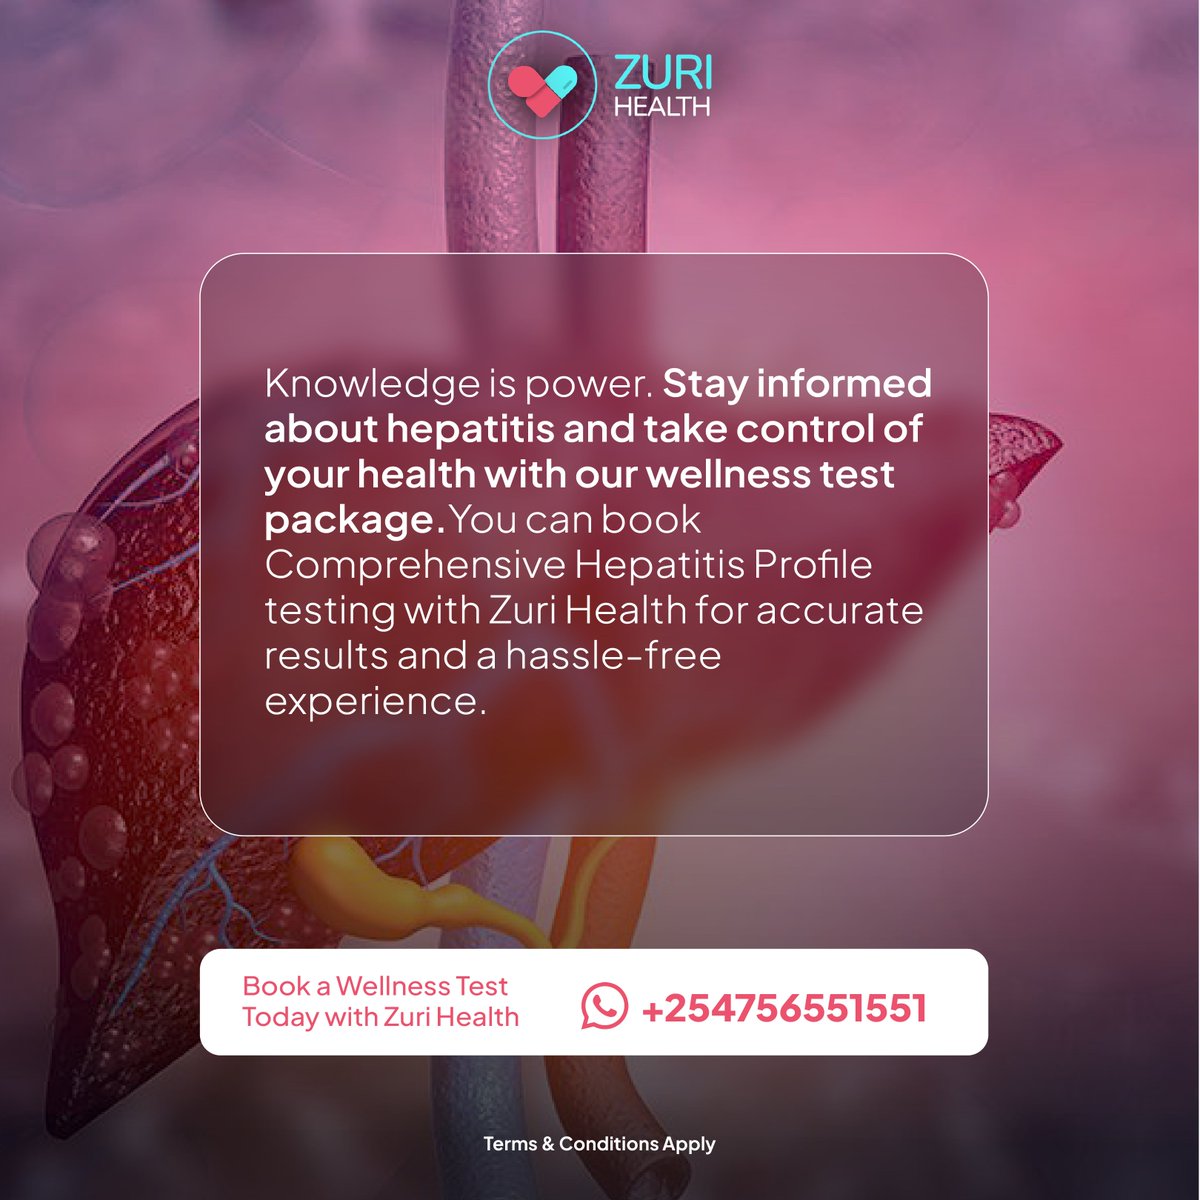 What do you need to know about viral hepatitis? 🤔 🤔

Find out from the carousel below

For bookings, contact us via WhatsApp on +254756551551 📲

#HealthAwareness #ZuriHealth #ChatWithADoctor #TelemedicineInKenya #HealthTech #Vera #AI #ZuriHealthServices